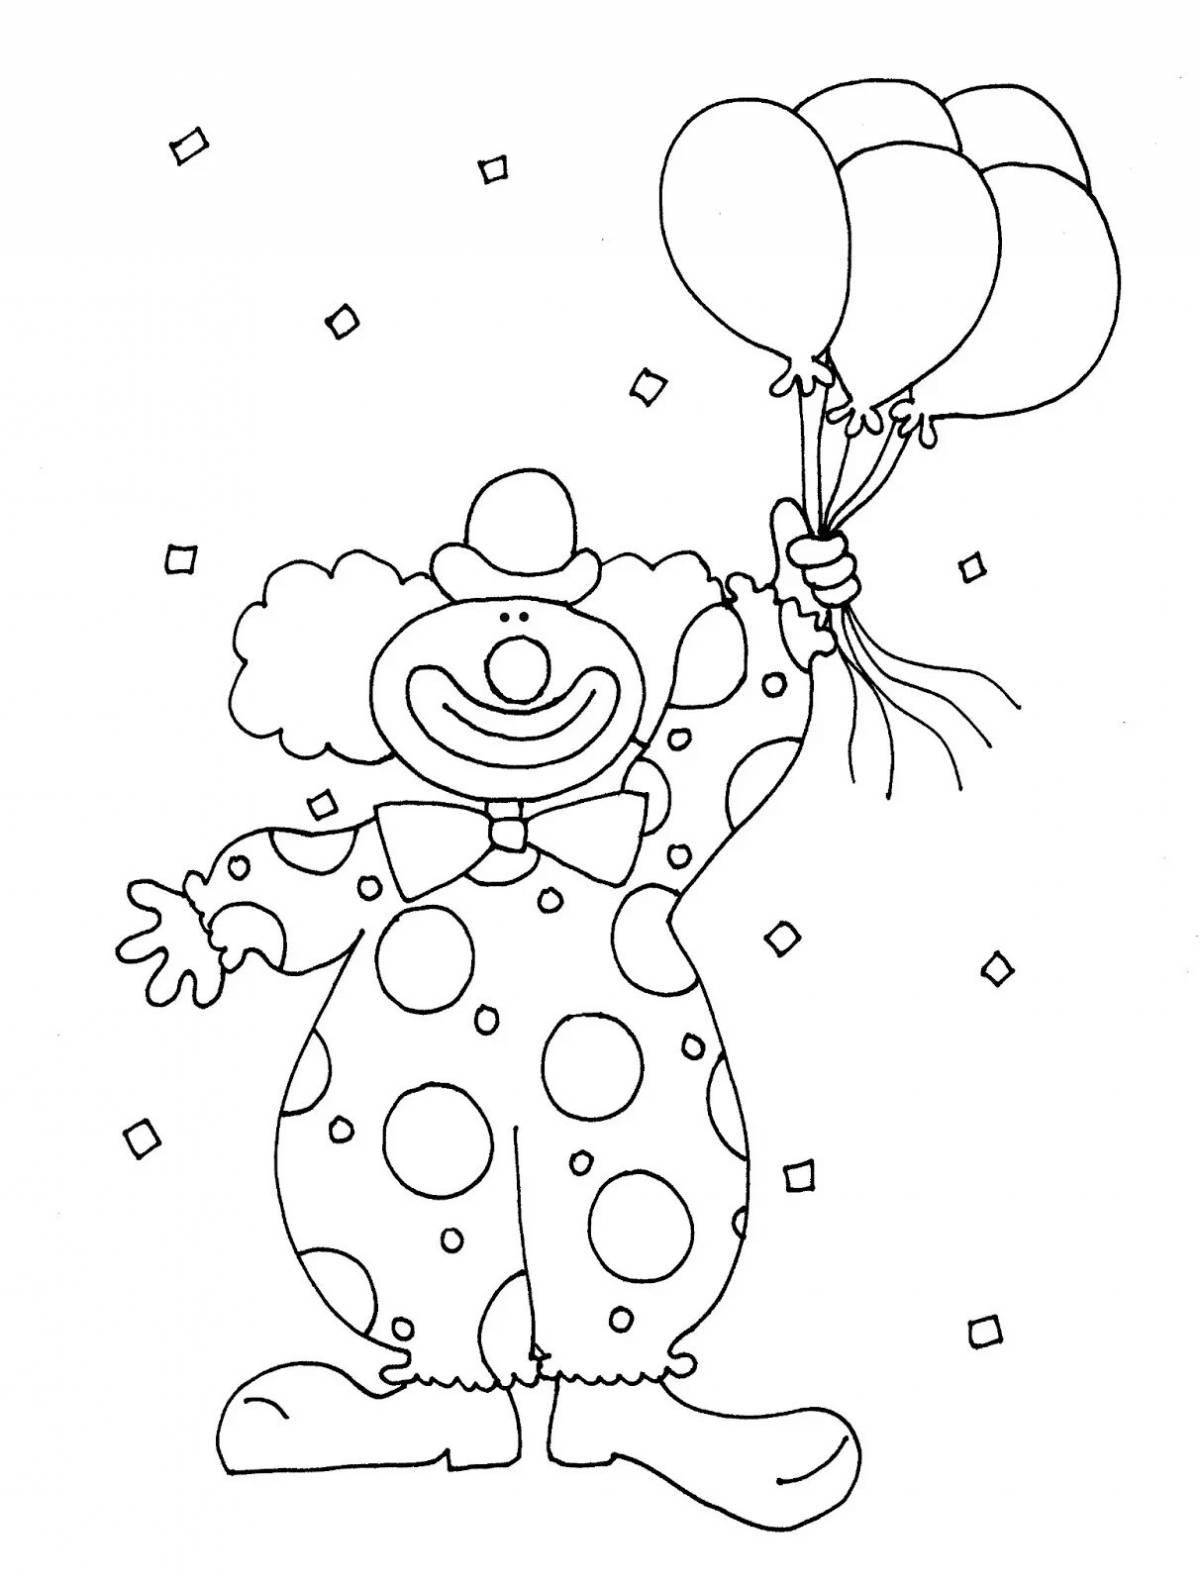 Sparkling clown with balloons